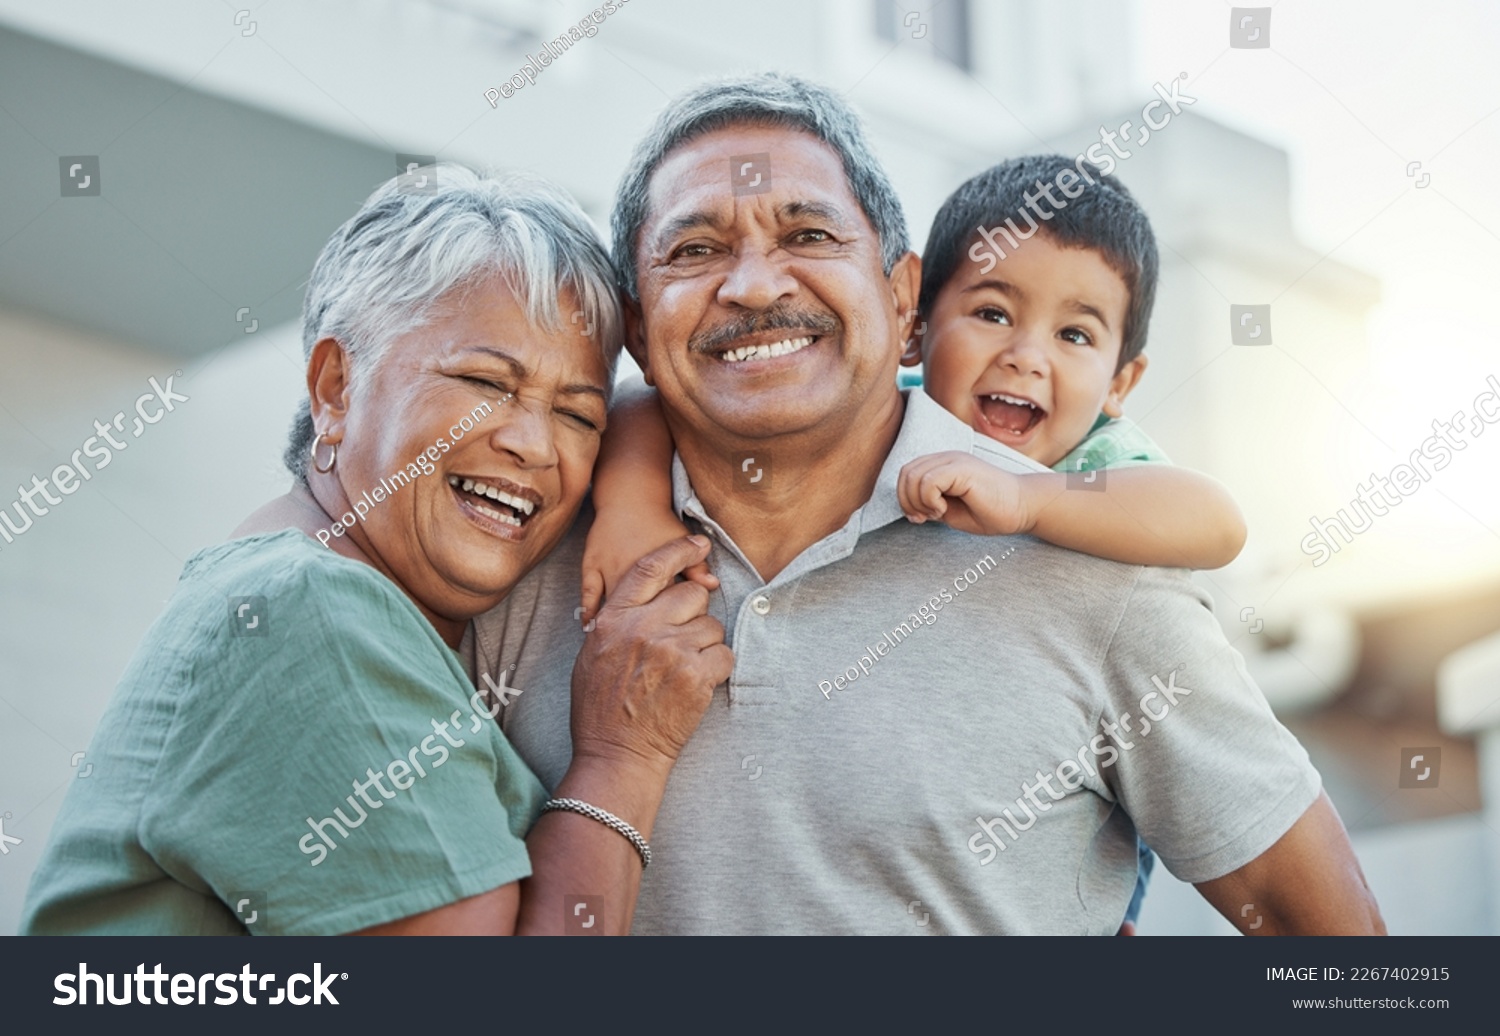 Grandparents, hug and child with smile for happy holiday or weekend break with elderly people at the house. Portrait of grandma and grandpa holding little boy on back for fun playful summer together #2267402915